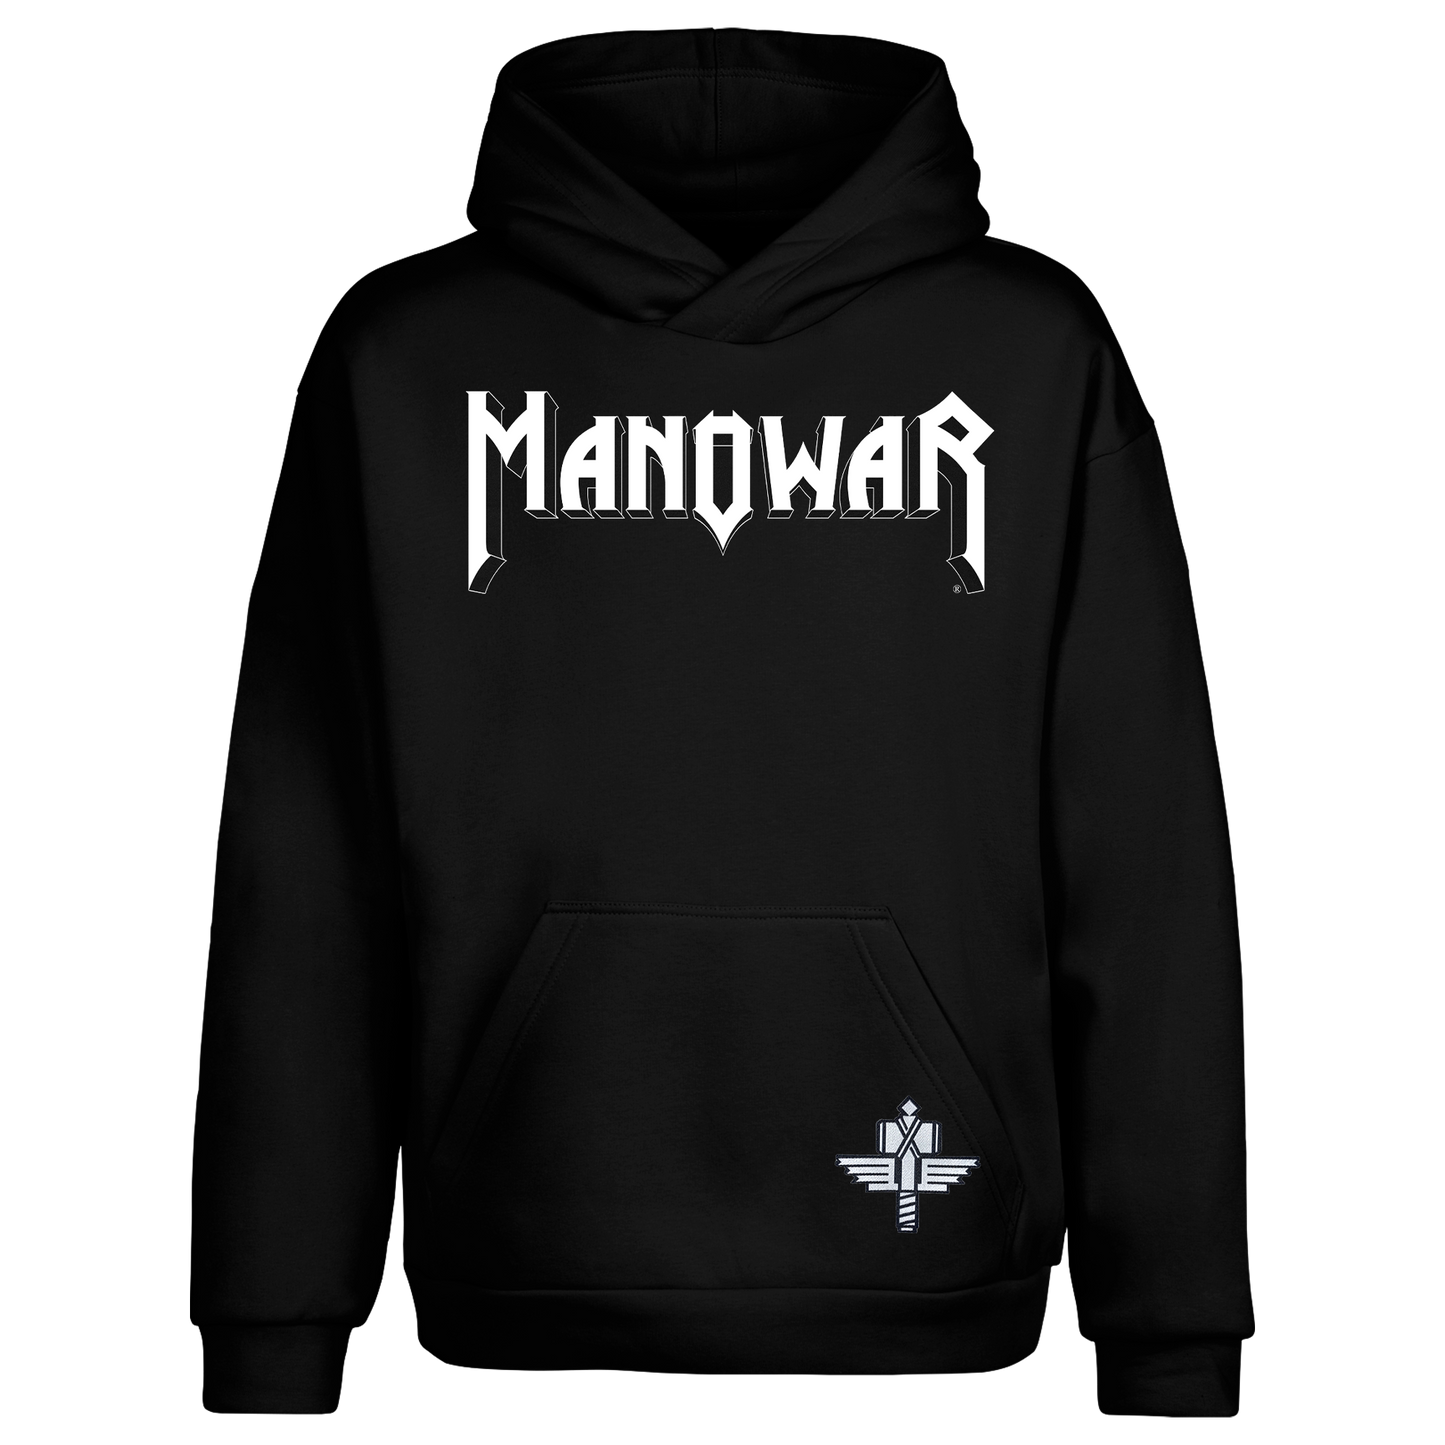 Hoodie With White MANOWAR Logo And SOTH Patch